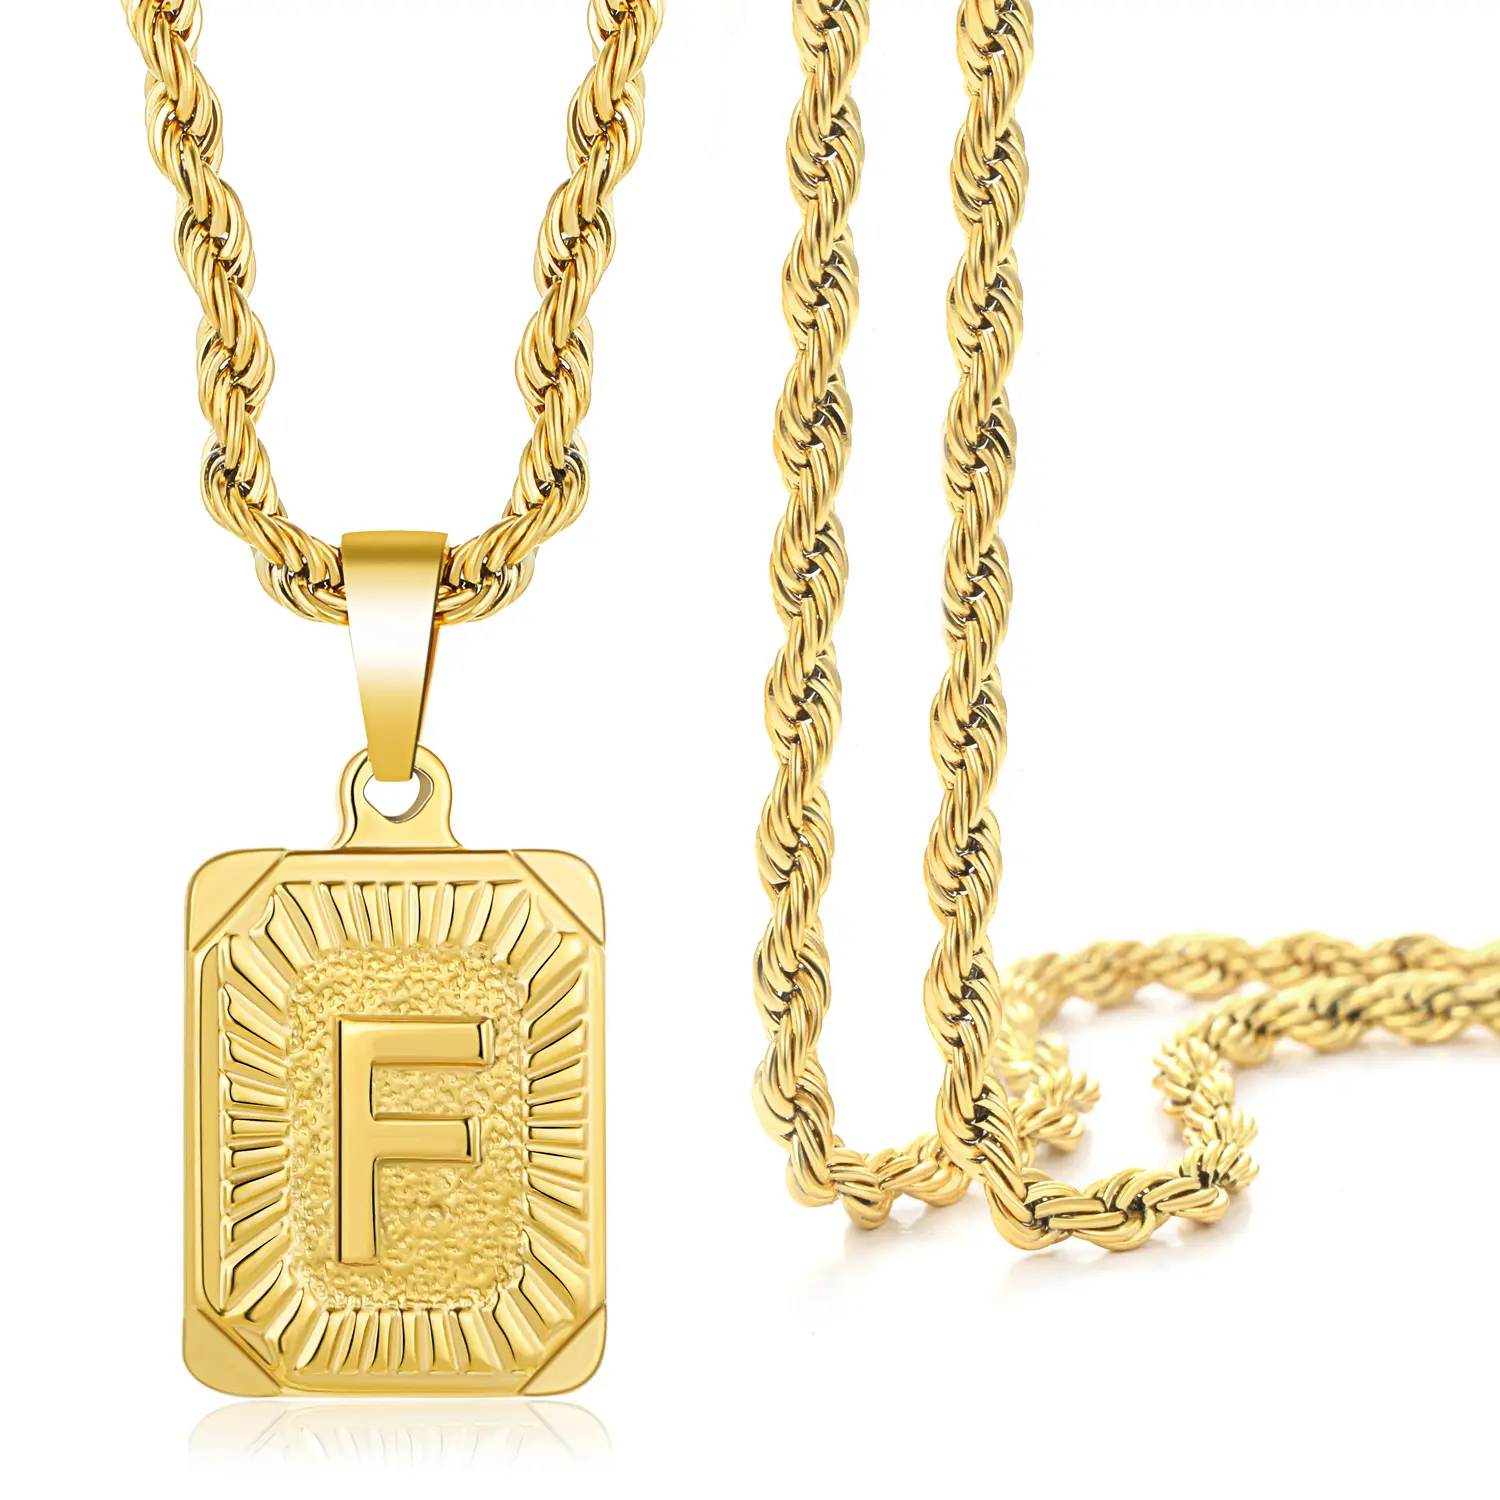 HOVANCI New Arrival Hiphop Alphabet A-z Letter Necklace 18k Gold Plated Stainless Steel Rope Chain Initial Pendant Necklace